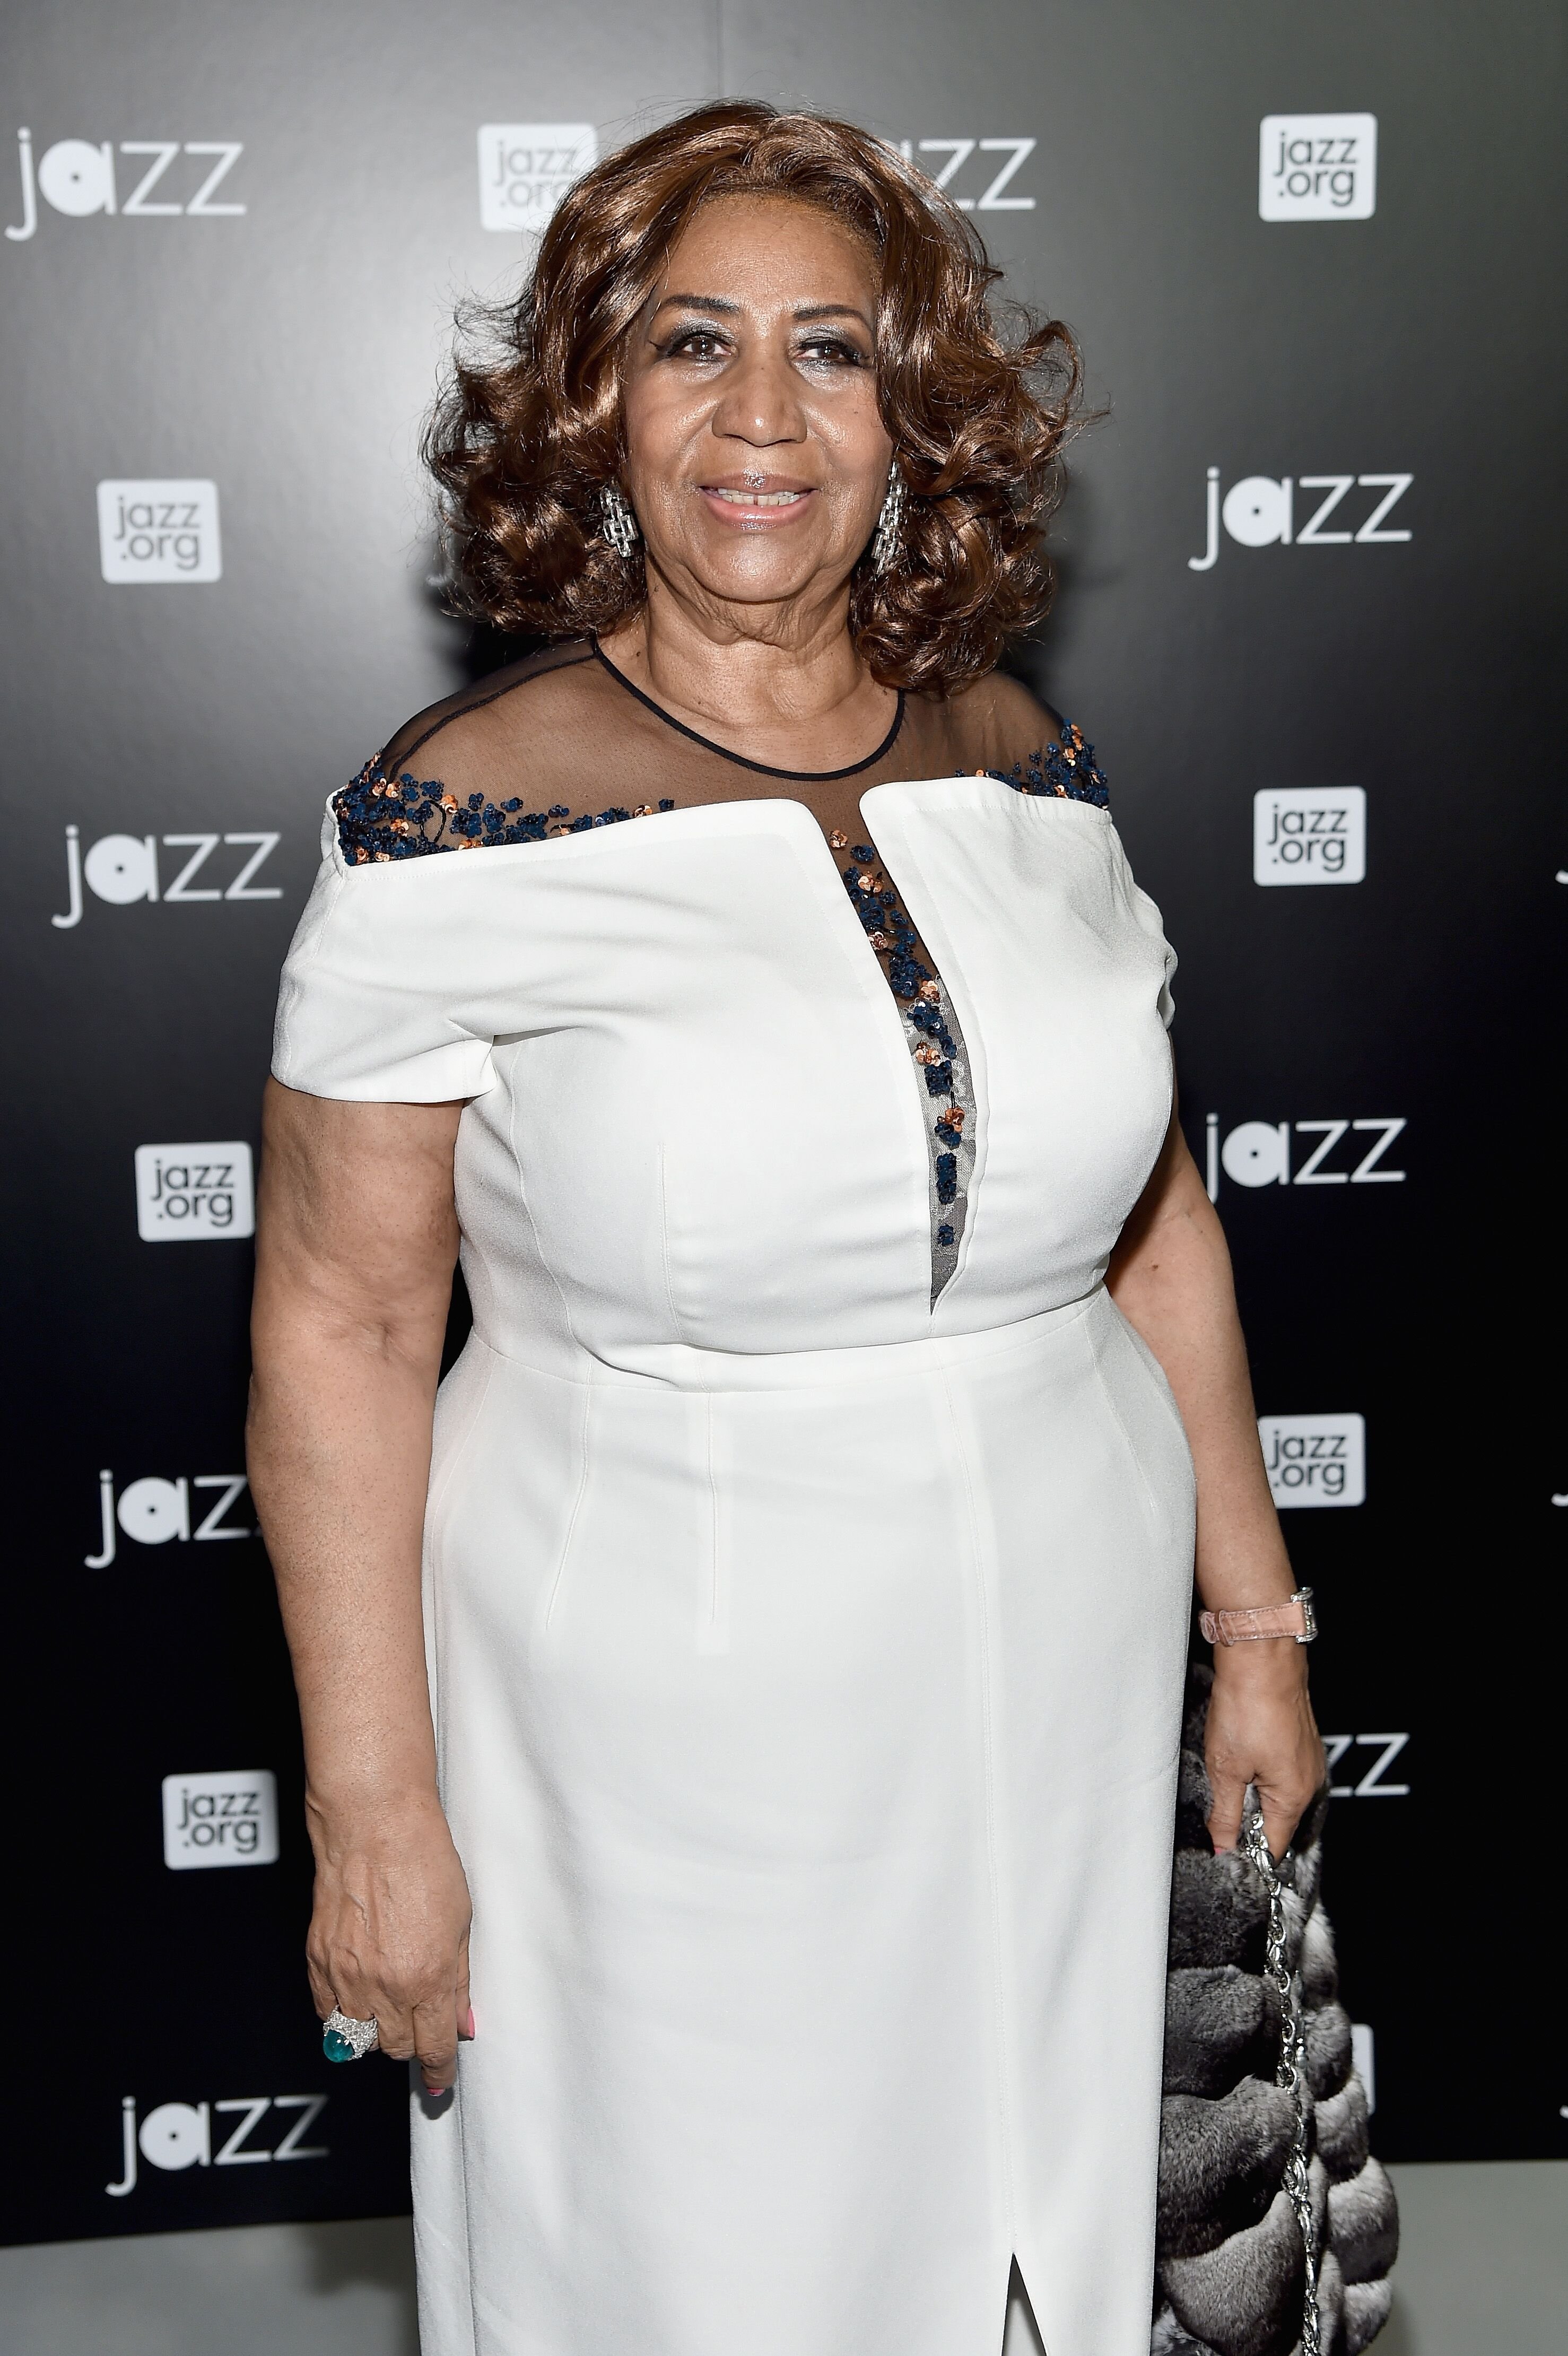 Musician Aretha Franklin attends the opening of the Mica and Ahmet Ertegun Atrium at Jazz at Lincoln Center on December 17, 2015 in New York City | Photo: Getty Images